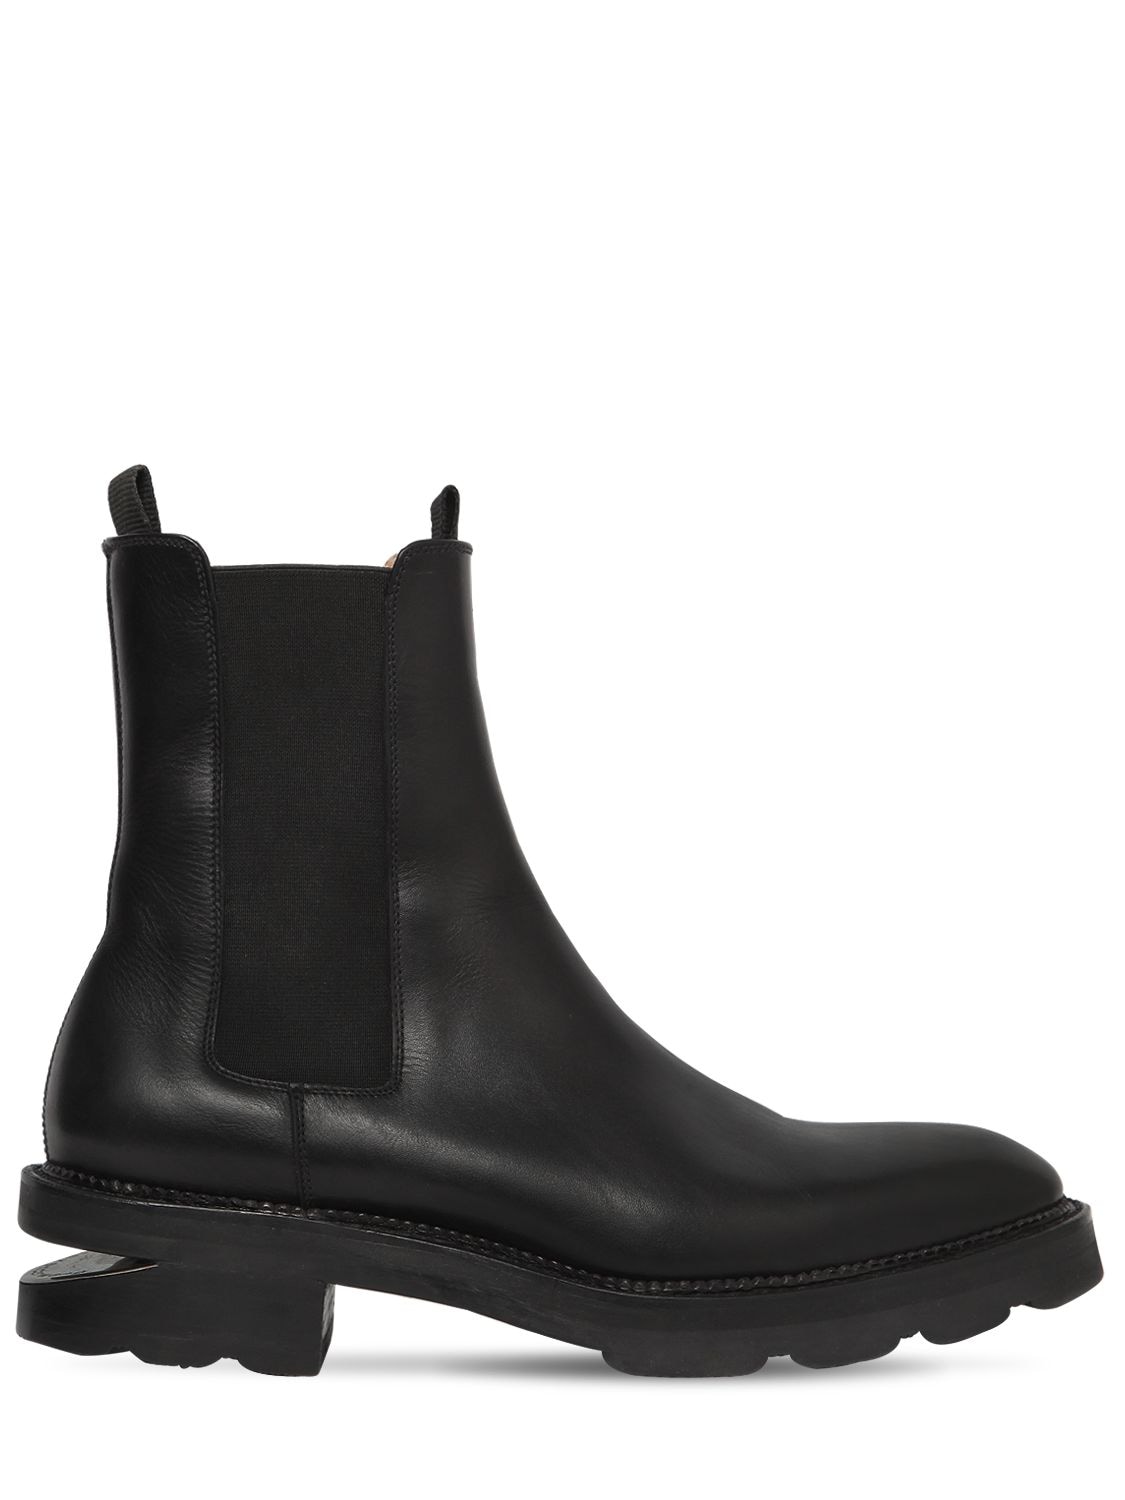 ALEXANDER WANG 45MM ANDY LEATHER BEATLE BOOTS,72IVMT001-MDAX0